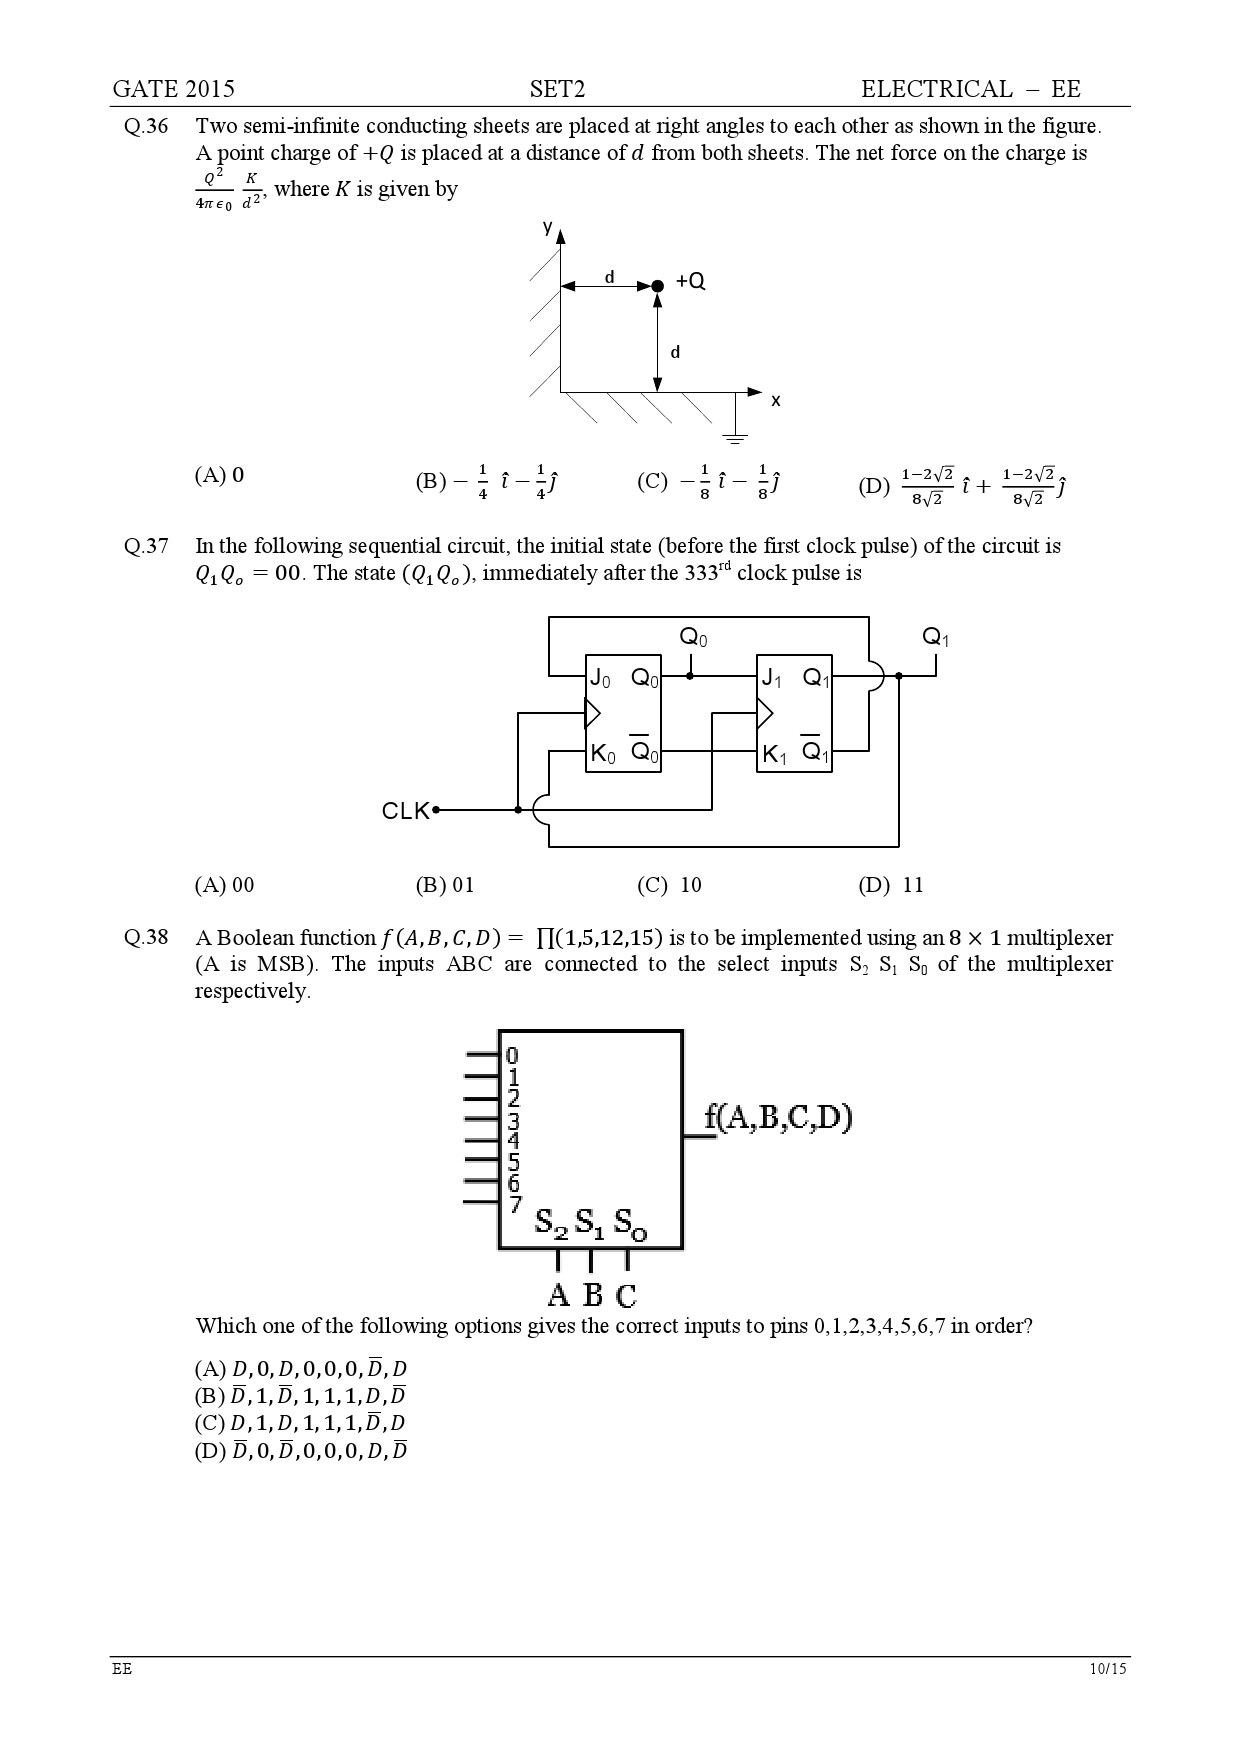 GATE Exam Question Paper 2015 Electrical Engineering Set 2 10